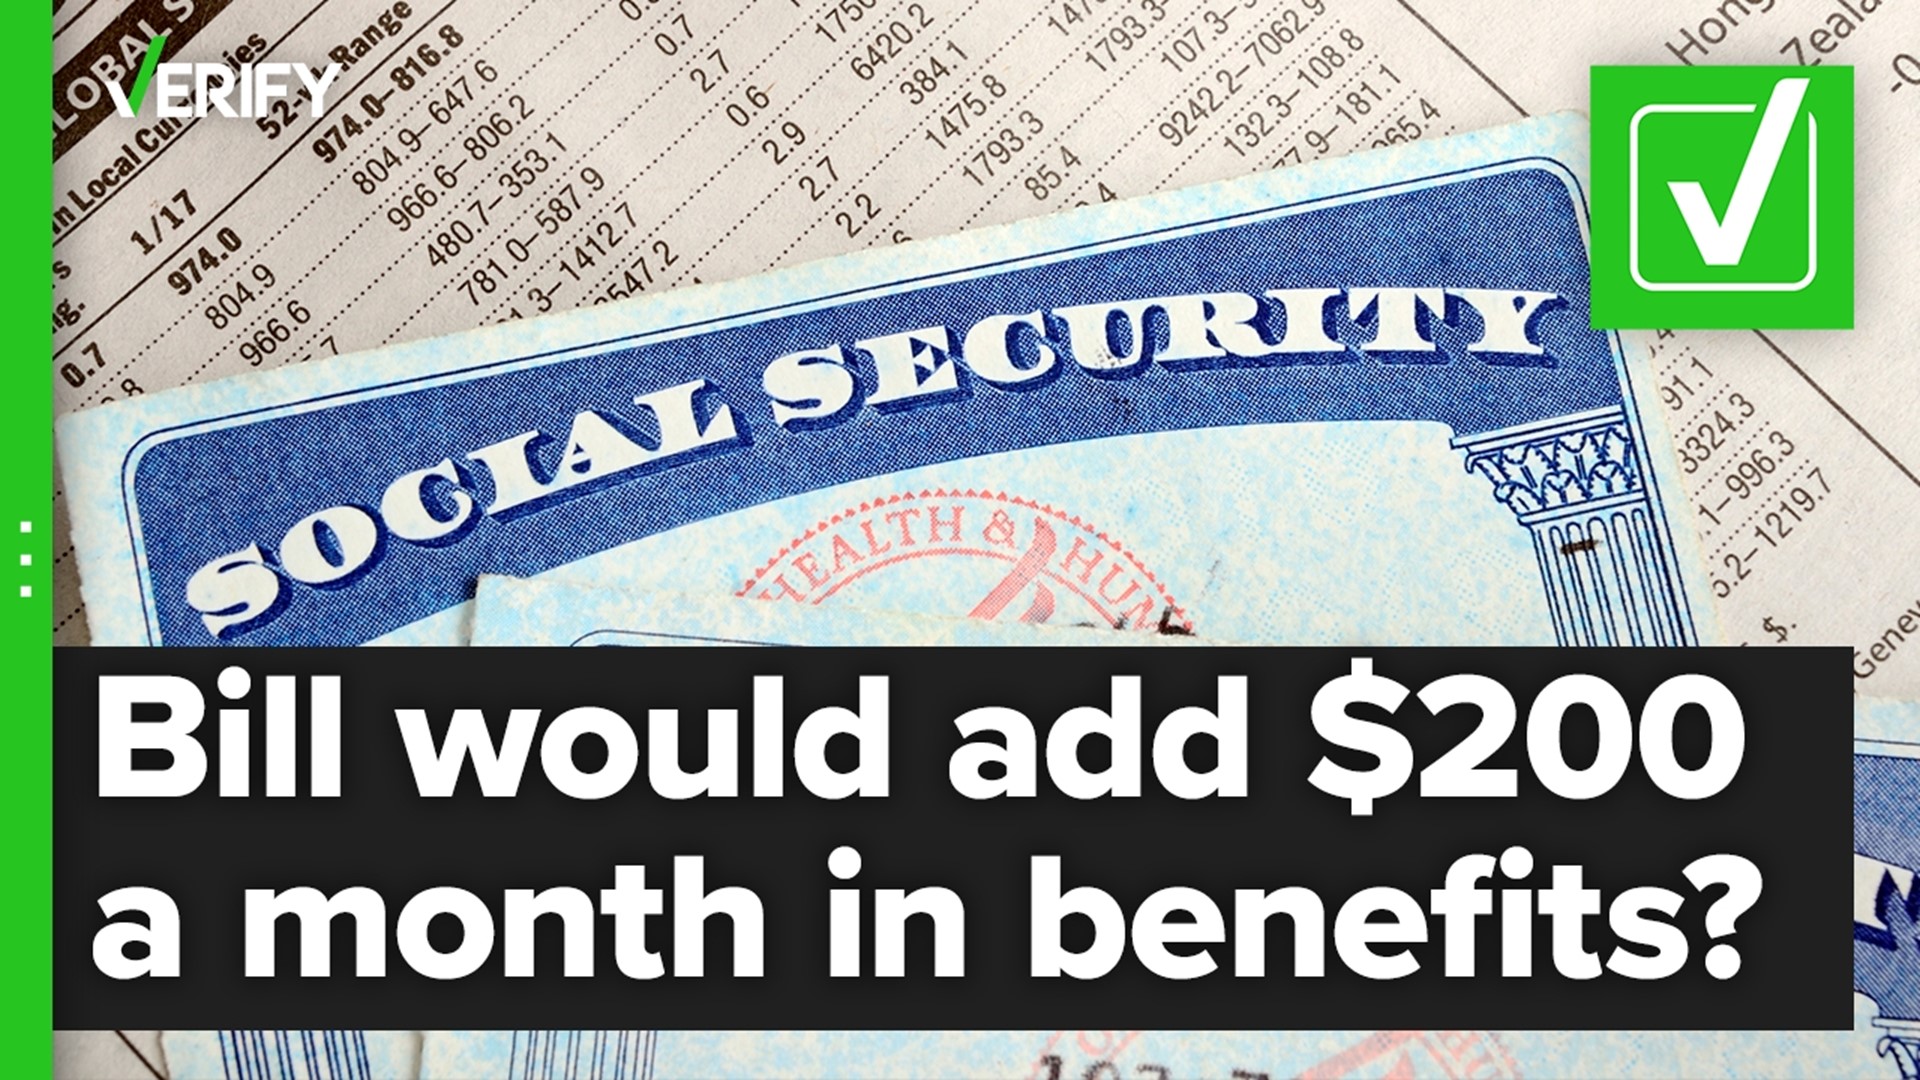 The Social Security Expansion Act would give recipients an extra $200 per month in benefits. The bill was introduced in the House and Senate, but hasn’t been passed.